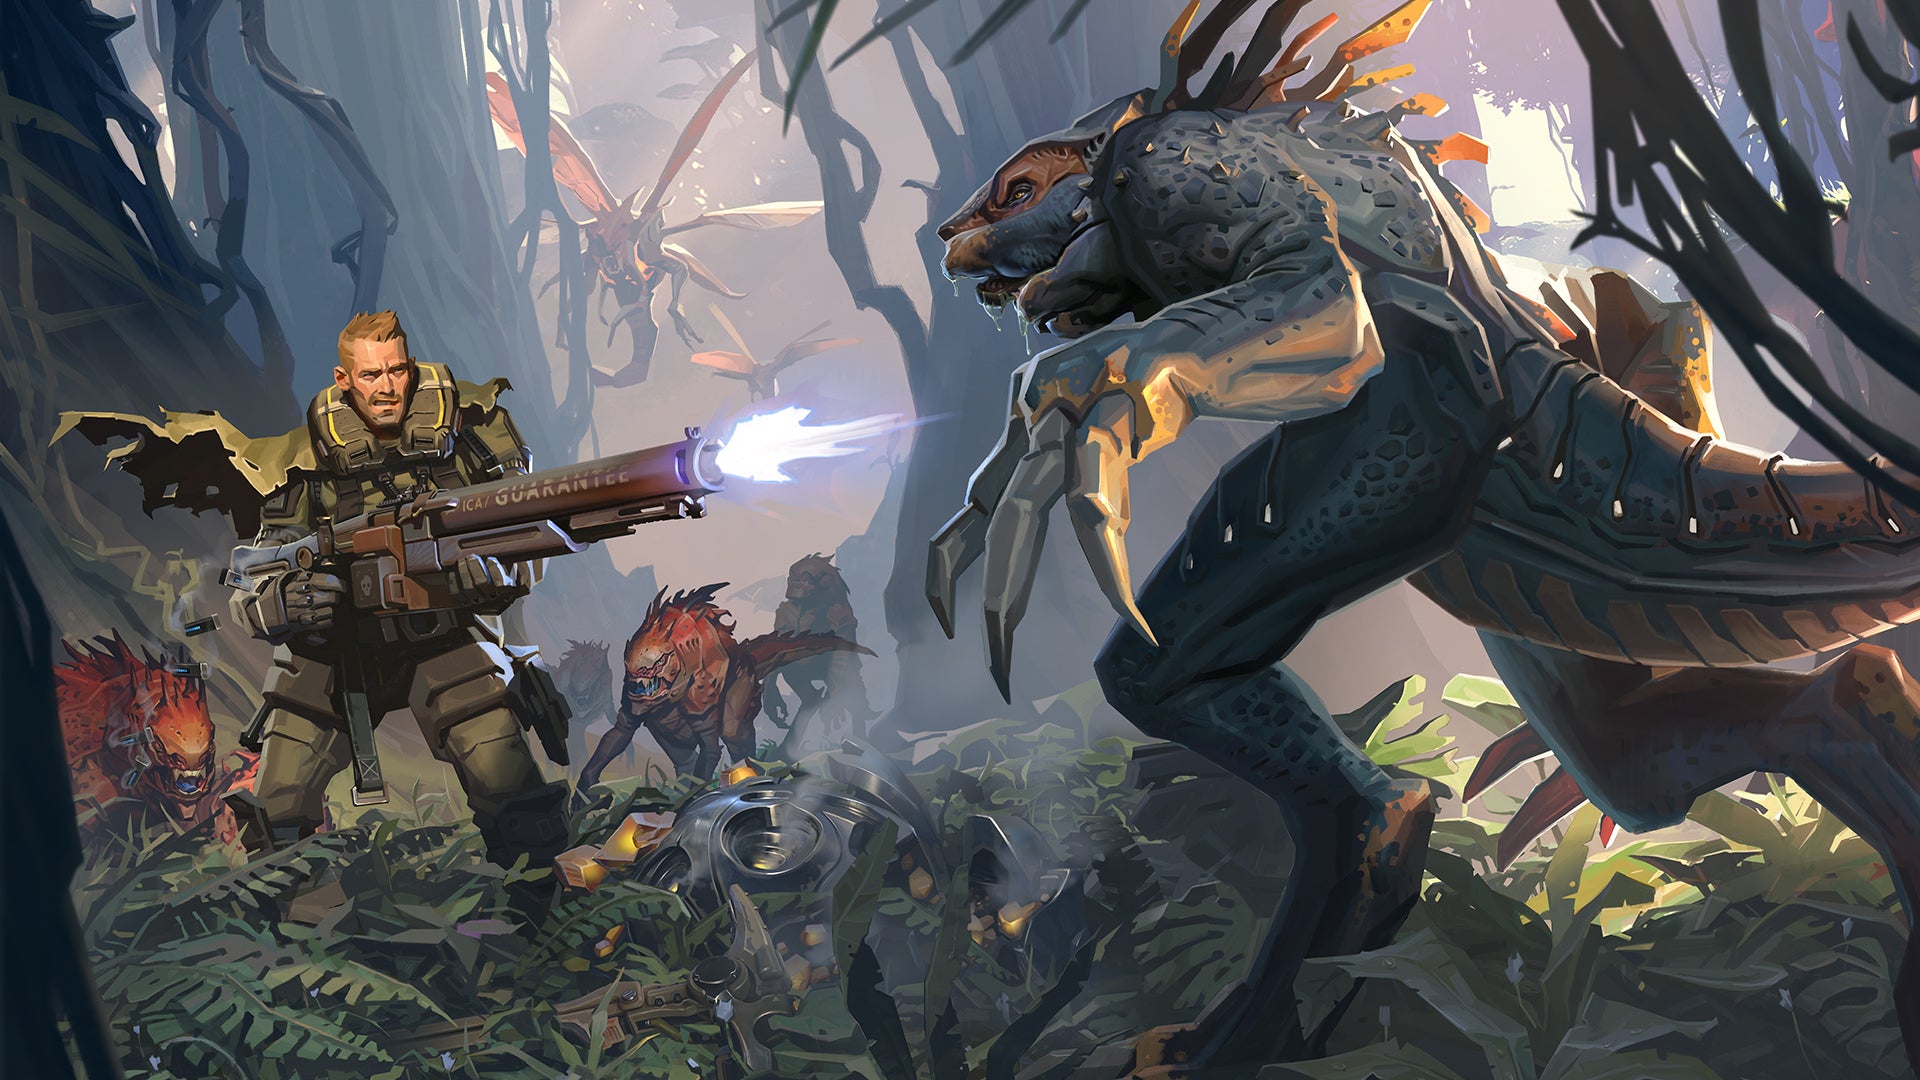 Concept art for The Cycle: Frontier depicting a Prospector fighting a Marauder and a group of Striders.